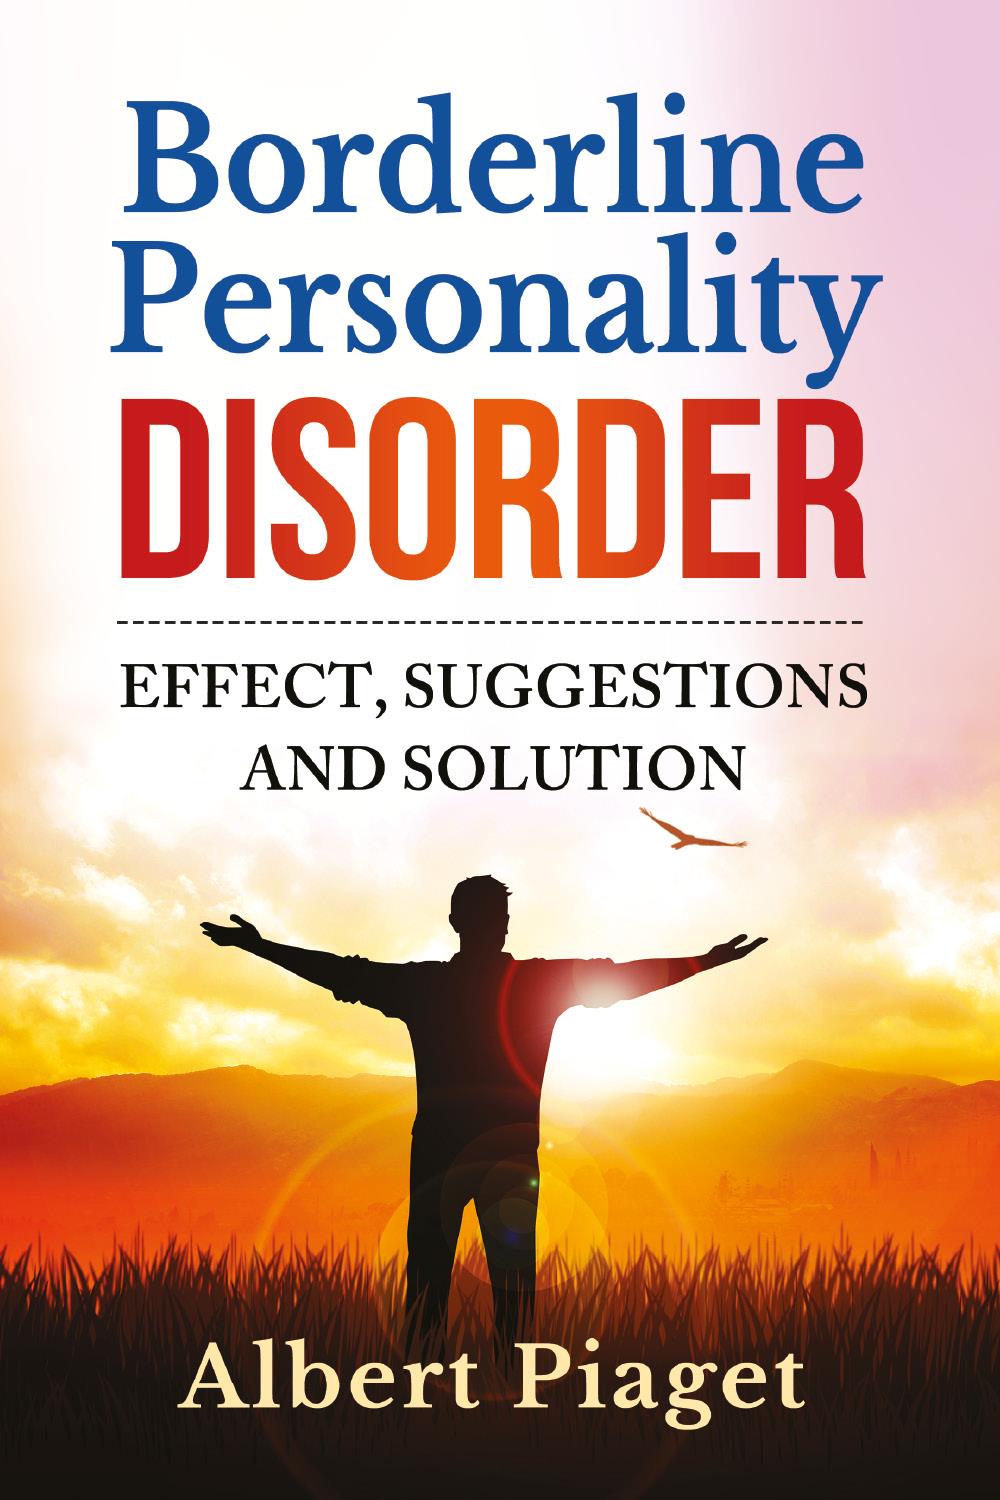 Borderline personality disorder. Effect, suggestions and solution